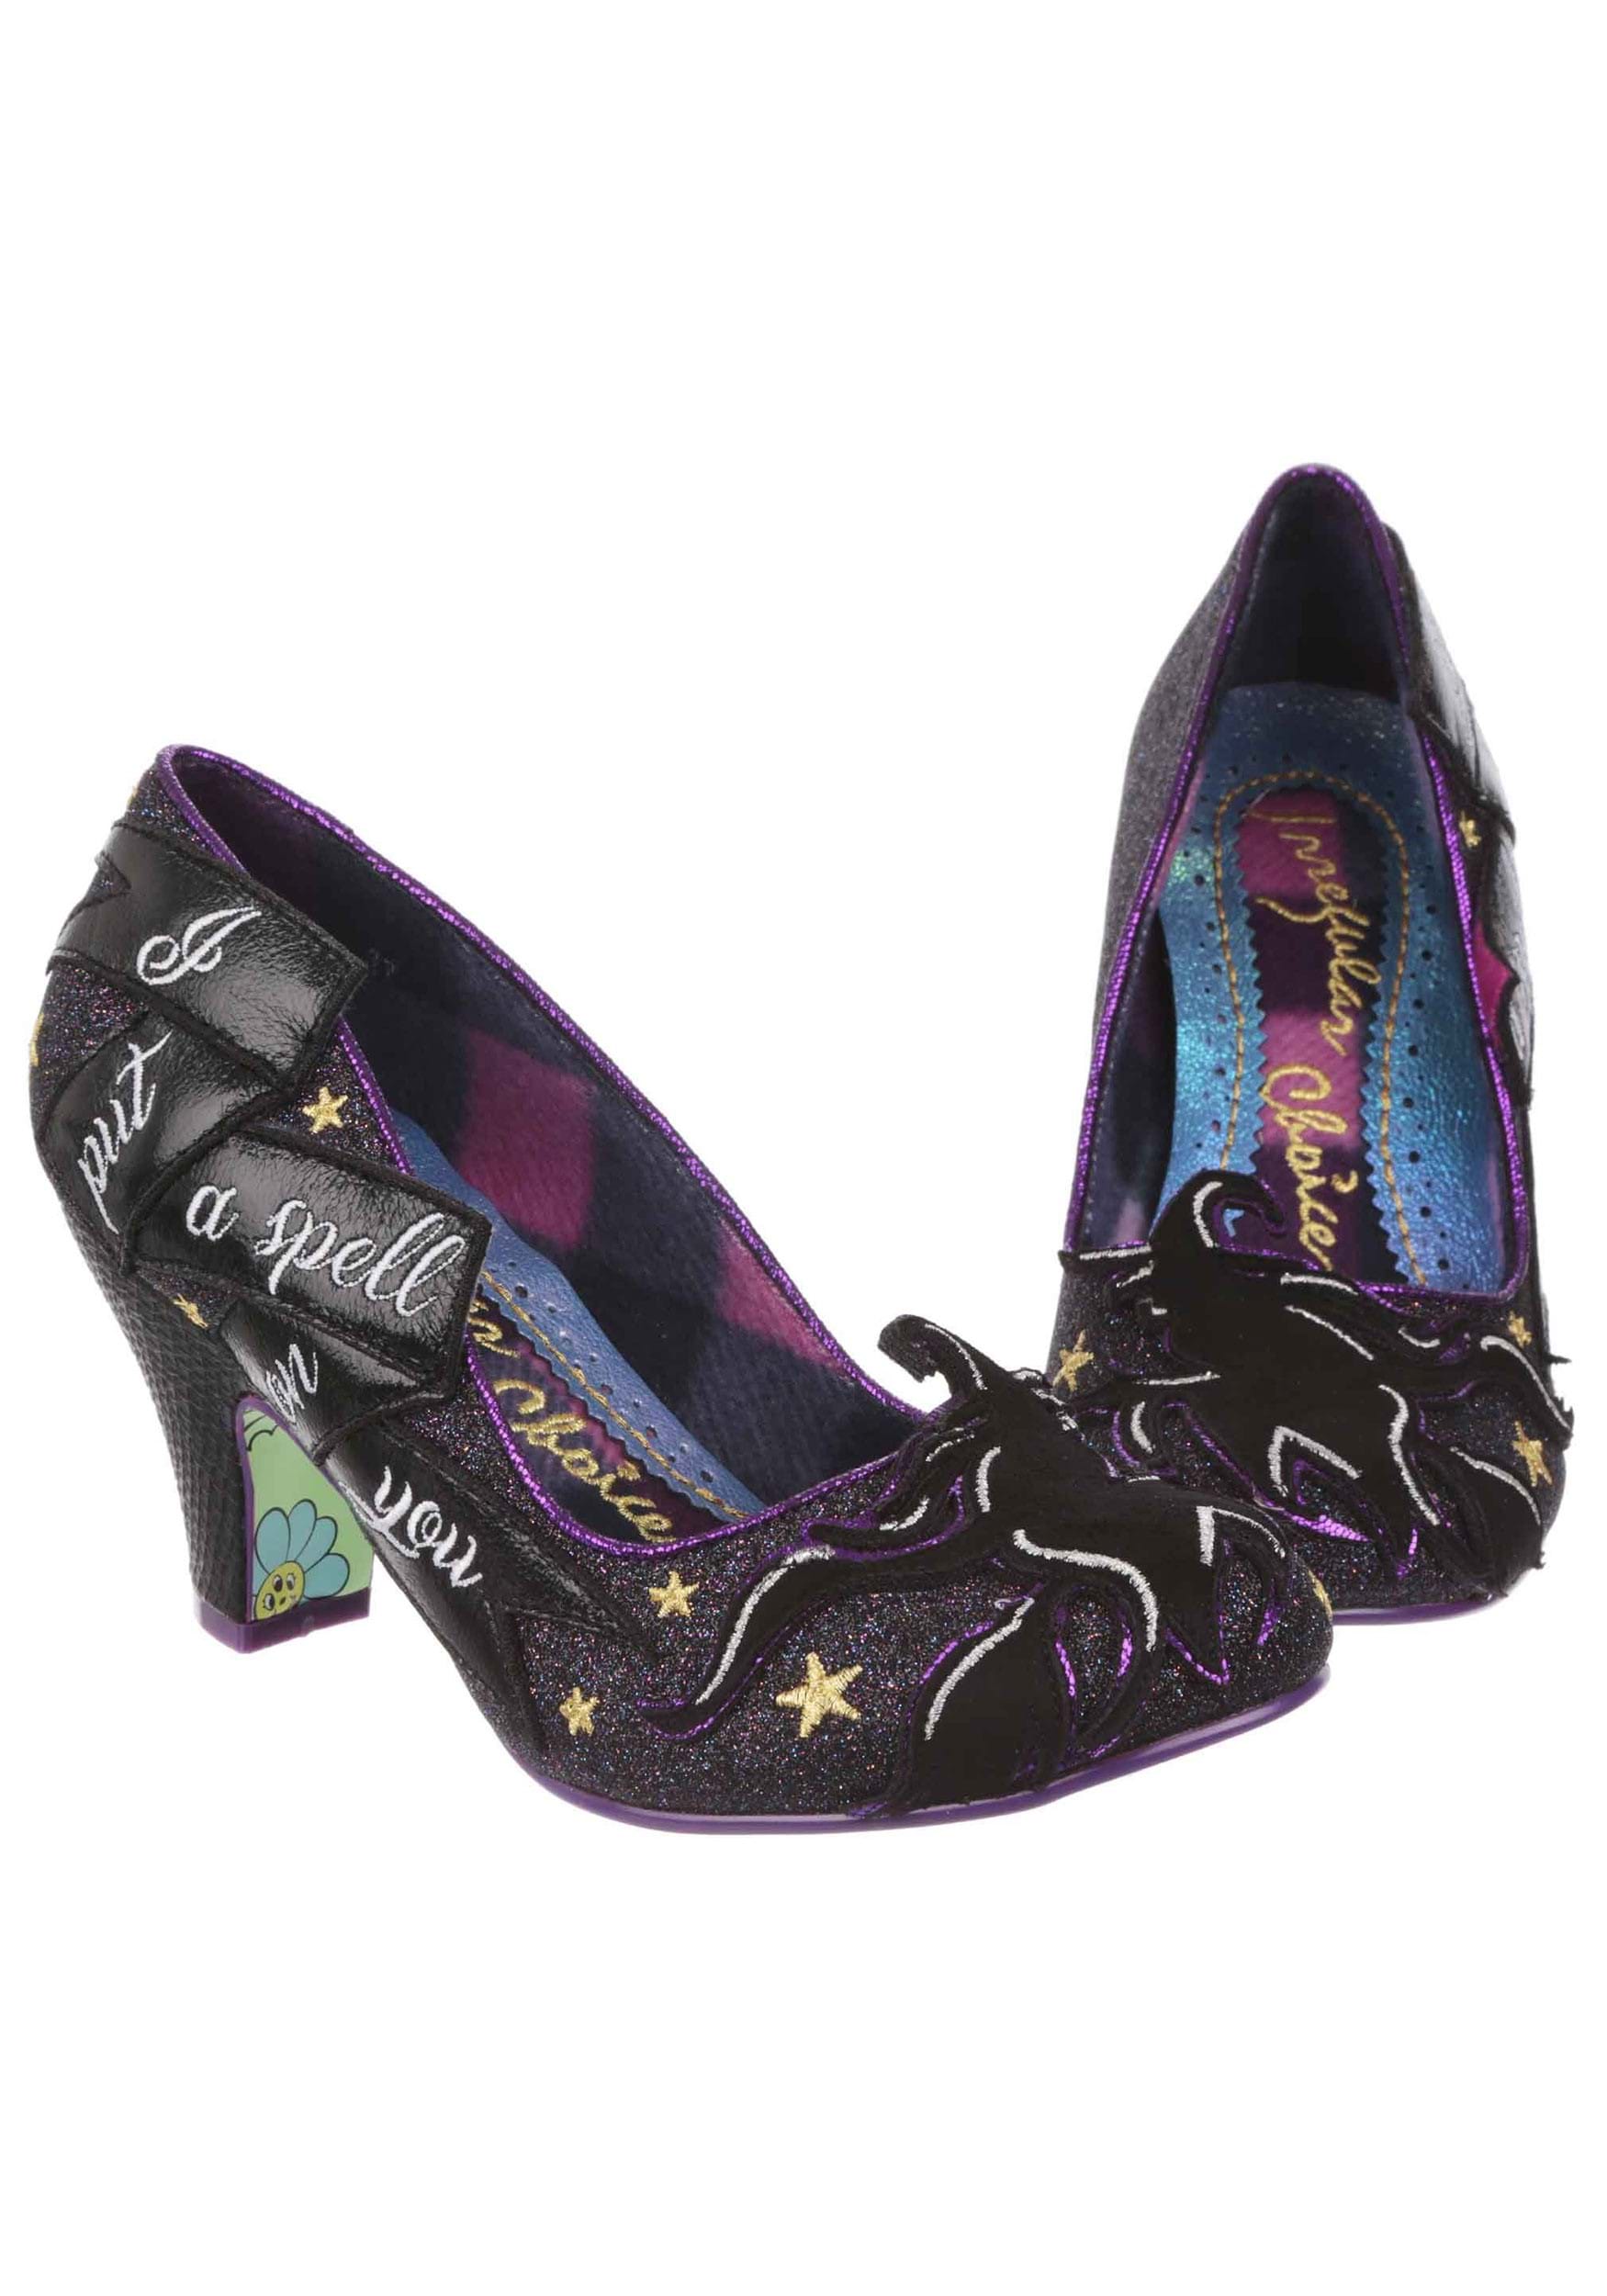 Irregular Choice "Now Youre Mine" Witch Heels